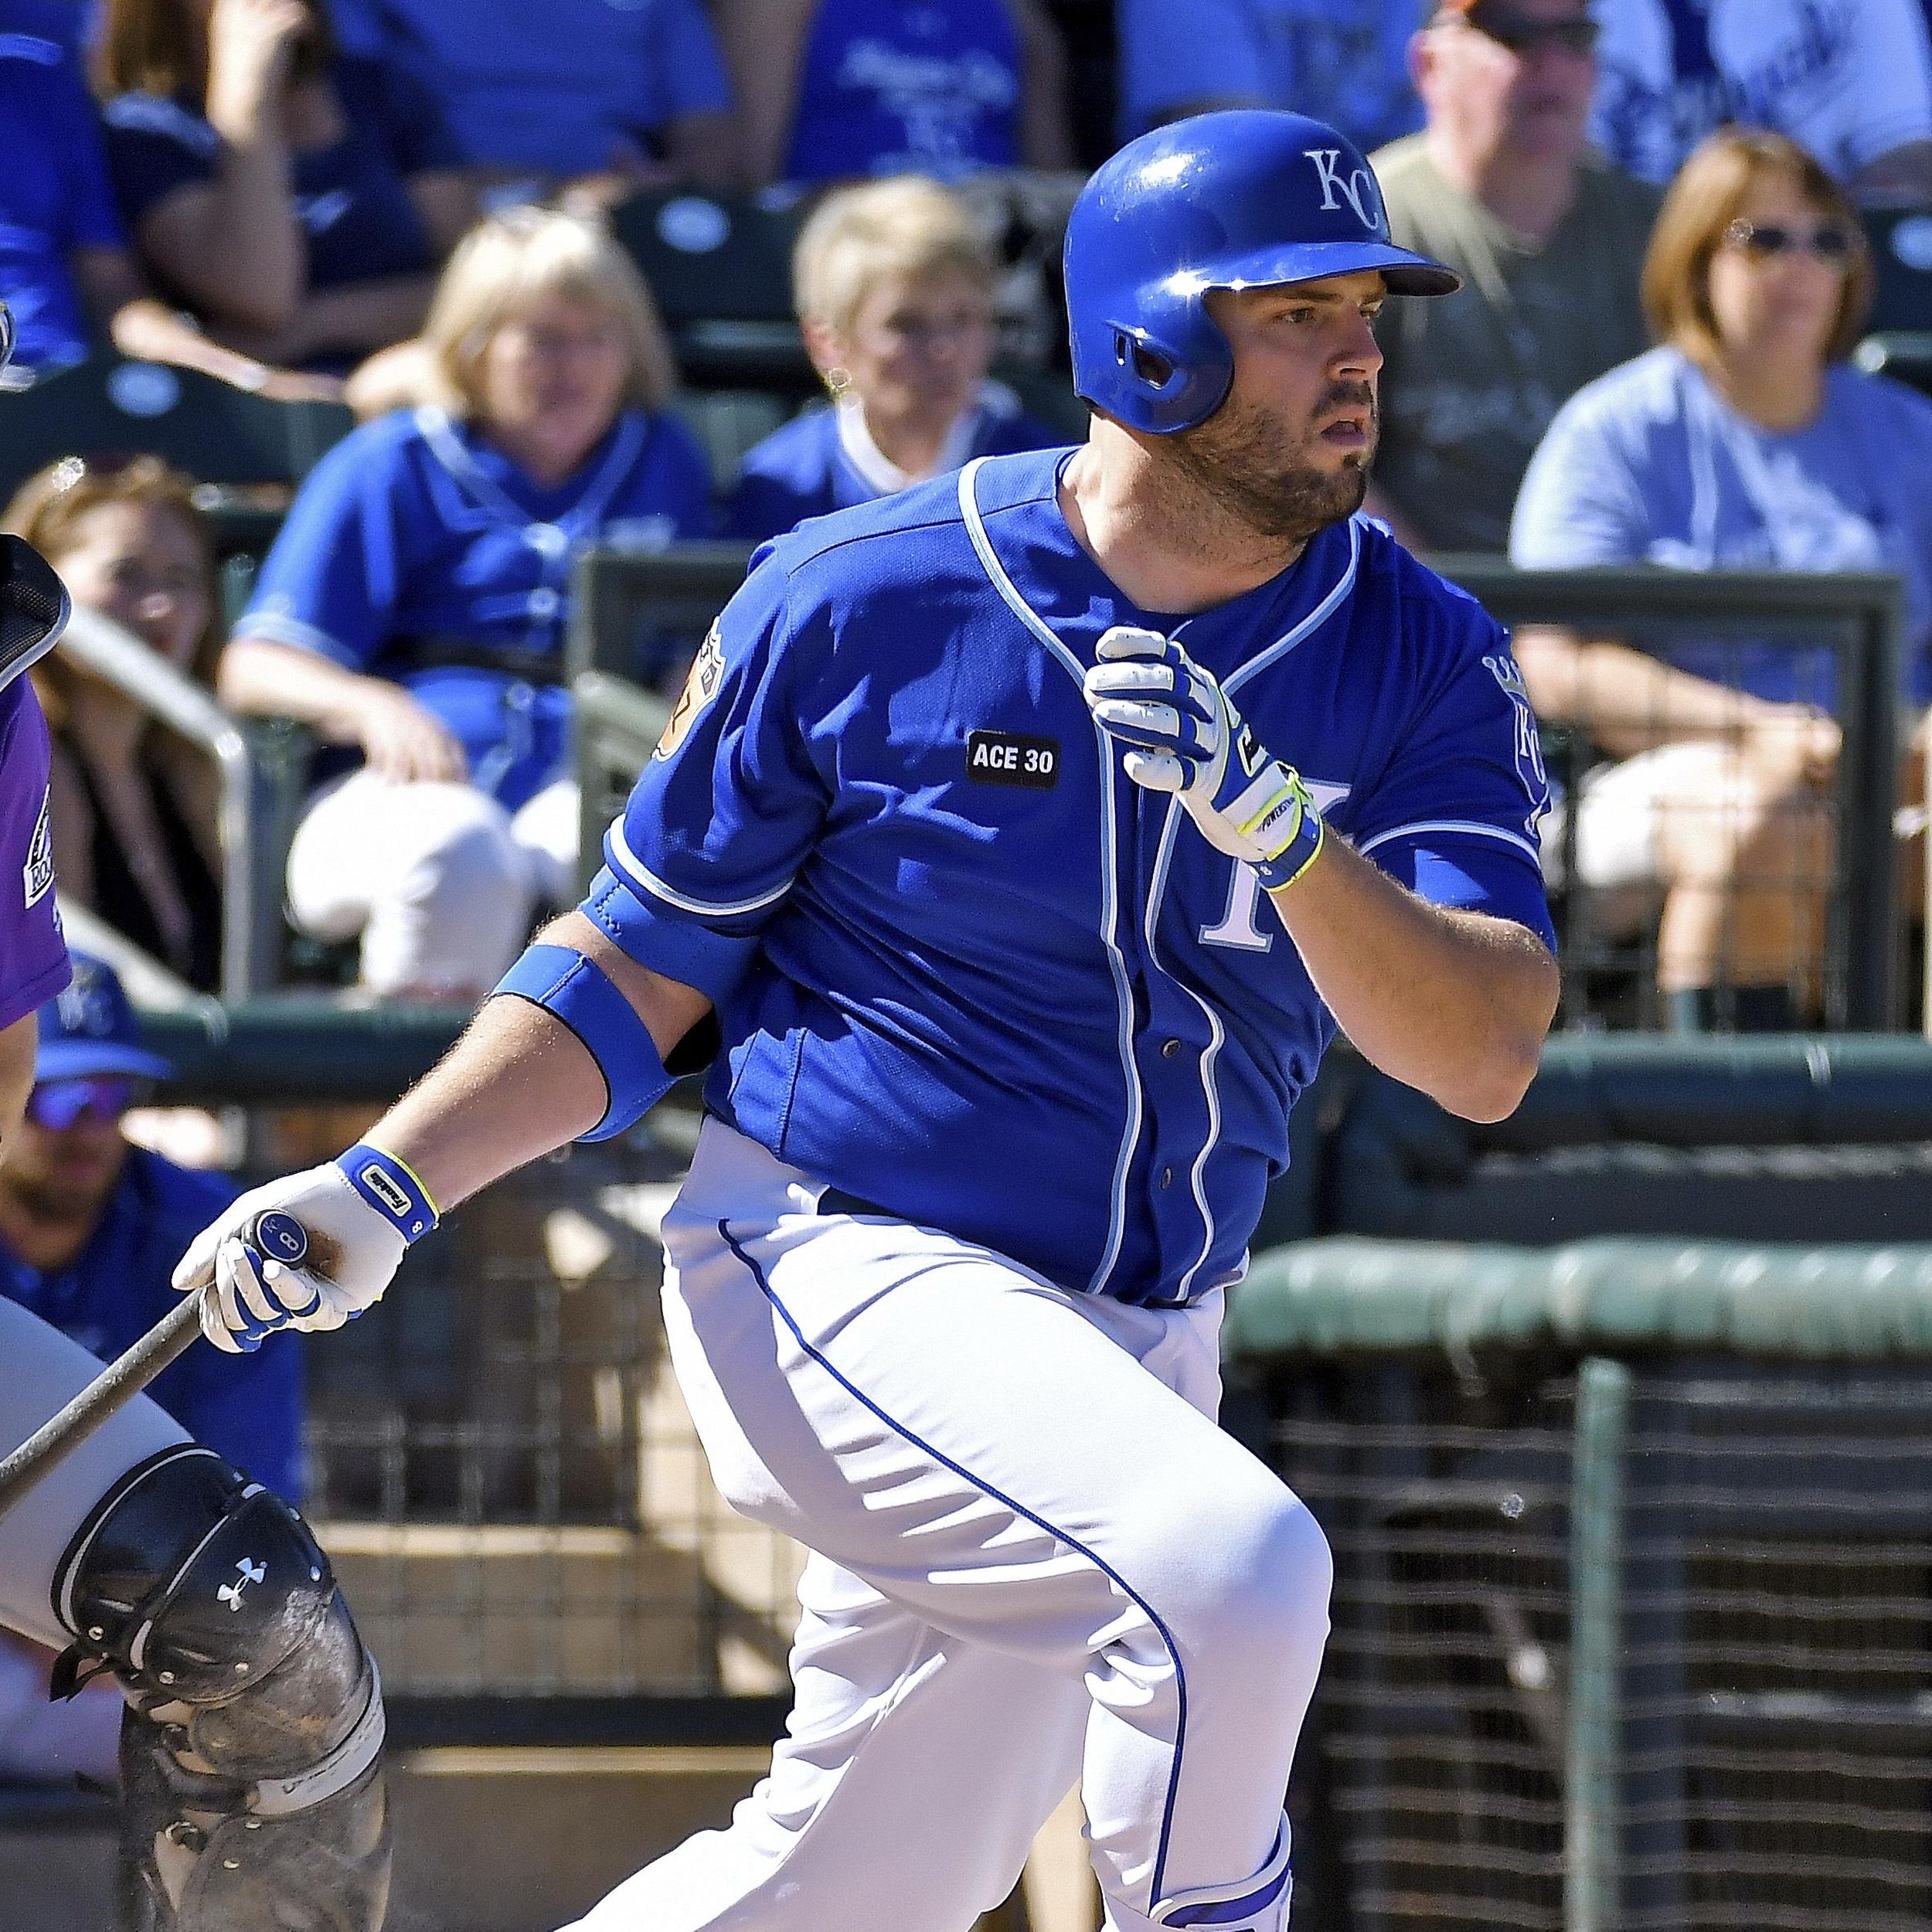 Royals third baseman Mike Moustakas knows clubhouse will change